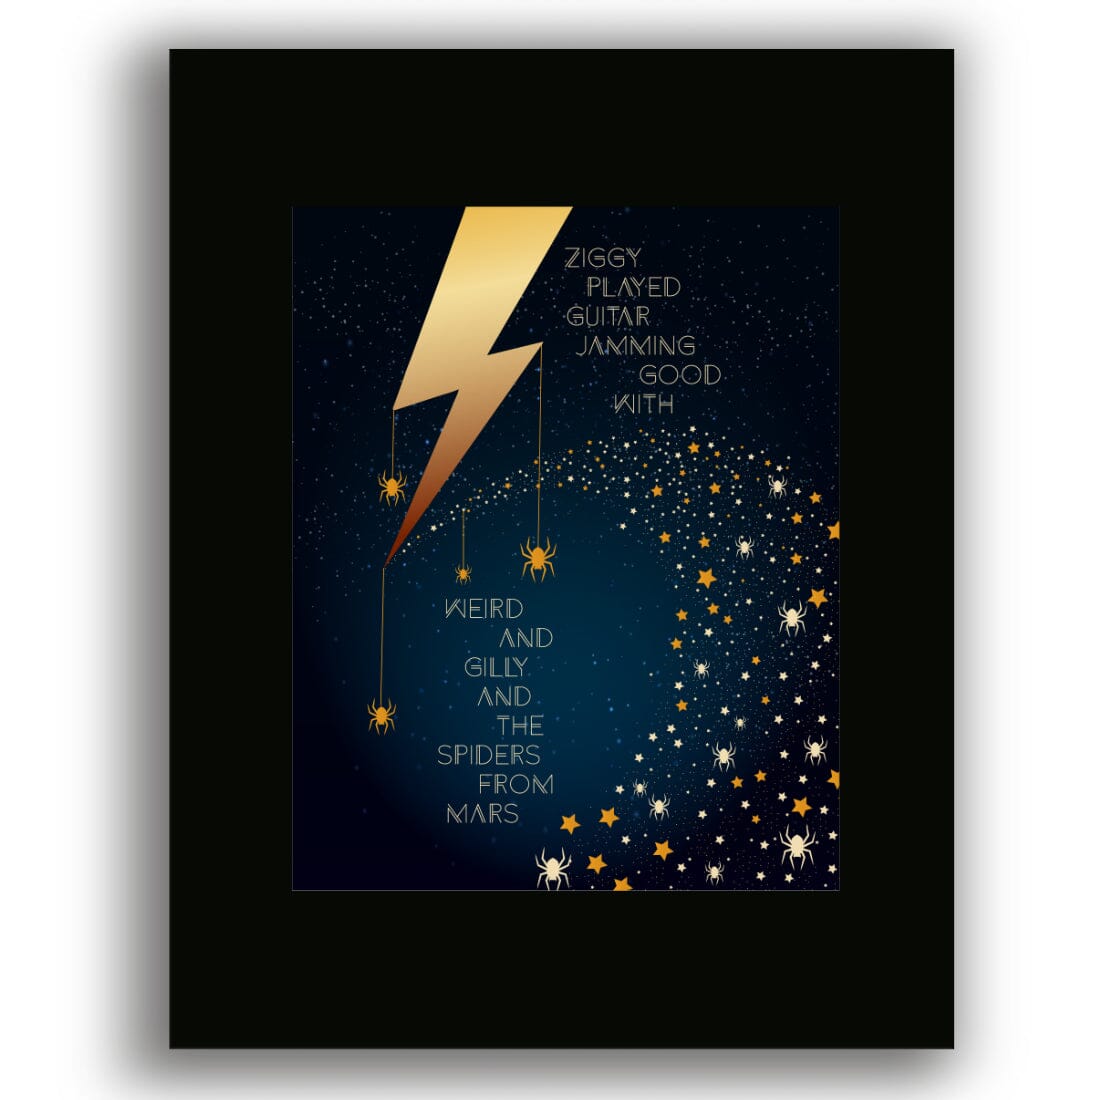 Ziggy Stardust by David Bowie - Song Lyric Visual Artwork Song Lyrics Art Song Lyrics Art 8x10 Black Matted Print 